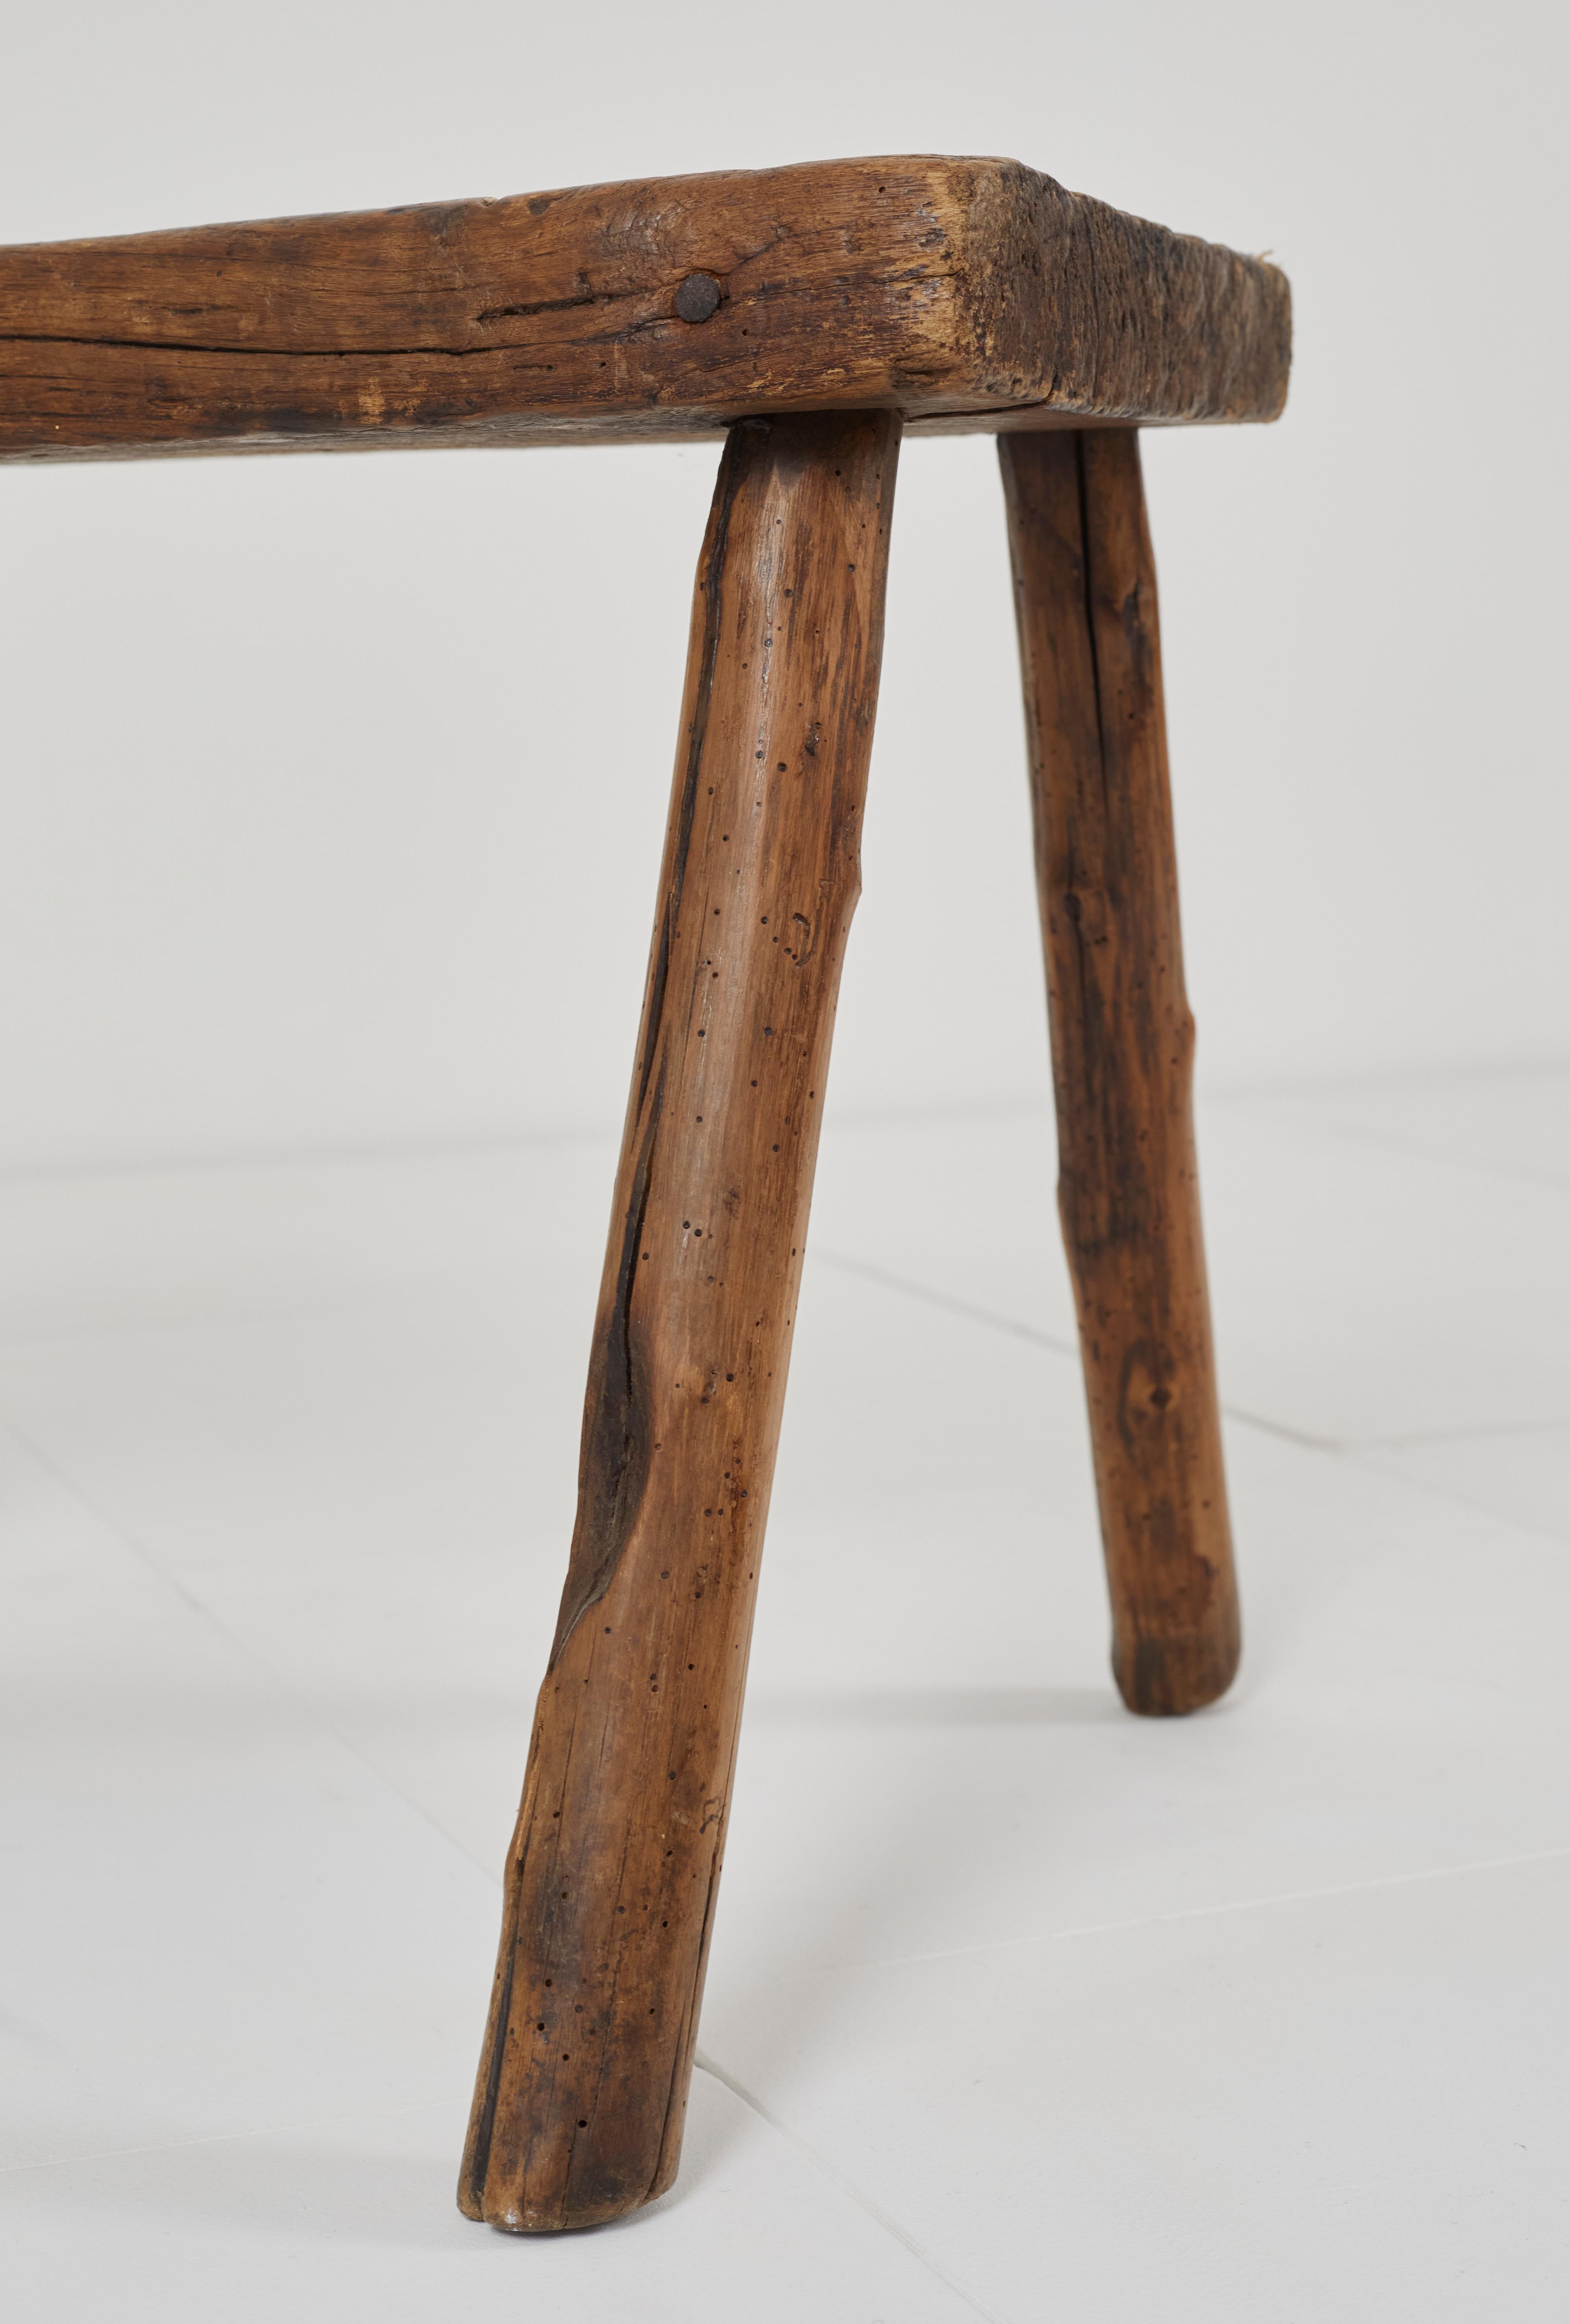 Primitive, Rustic, Antique Bench / Stool, France, 19th Century For Sale 3